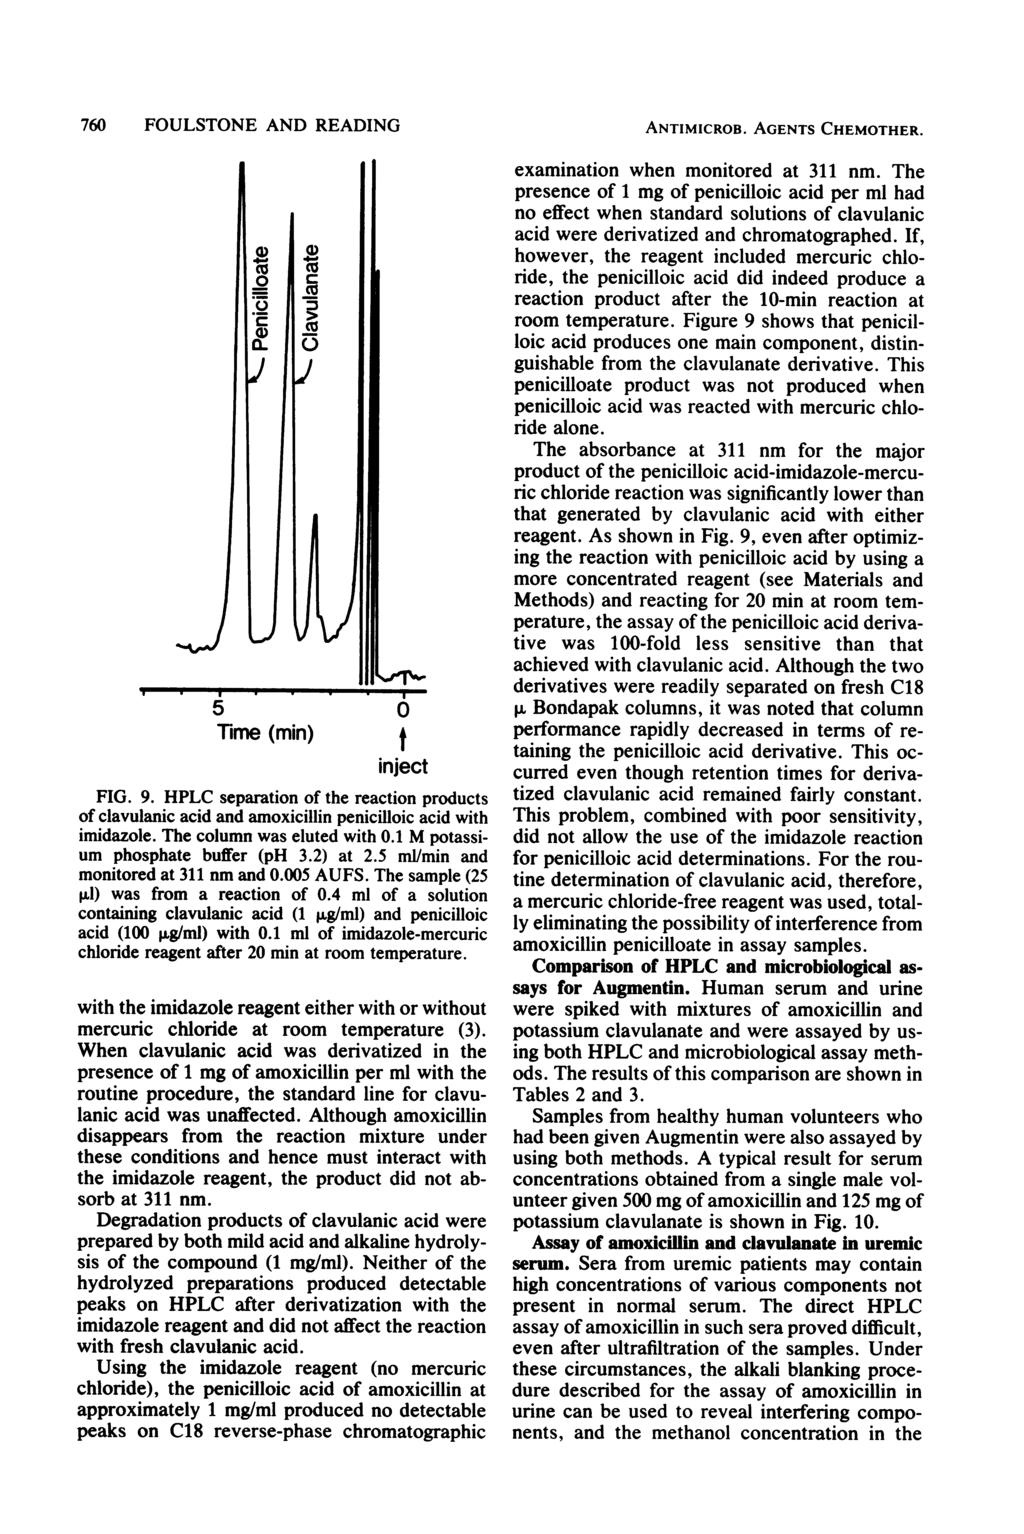 760 FOULSTONE AND READING Time (min) inject FIG. 9. HPLC separation of the reaction products of clavulanic acid and amoxicillin penicilloic acid with imidazole. The column was eluted with 0.